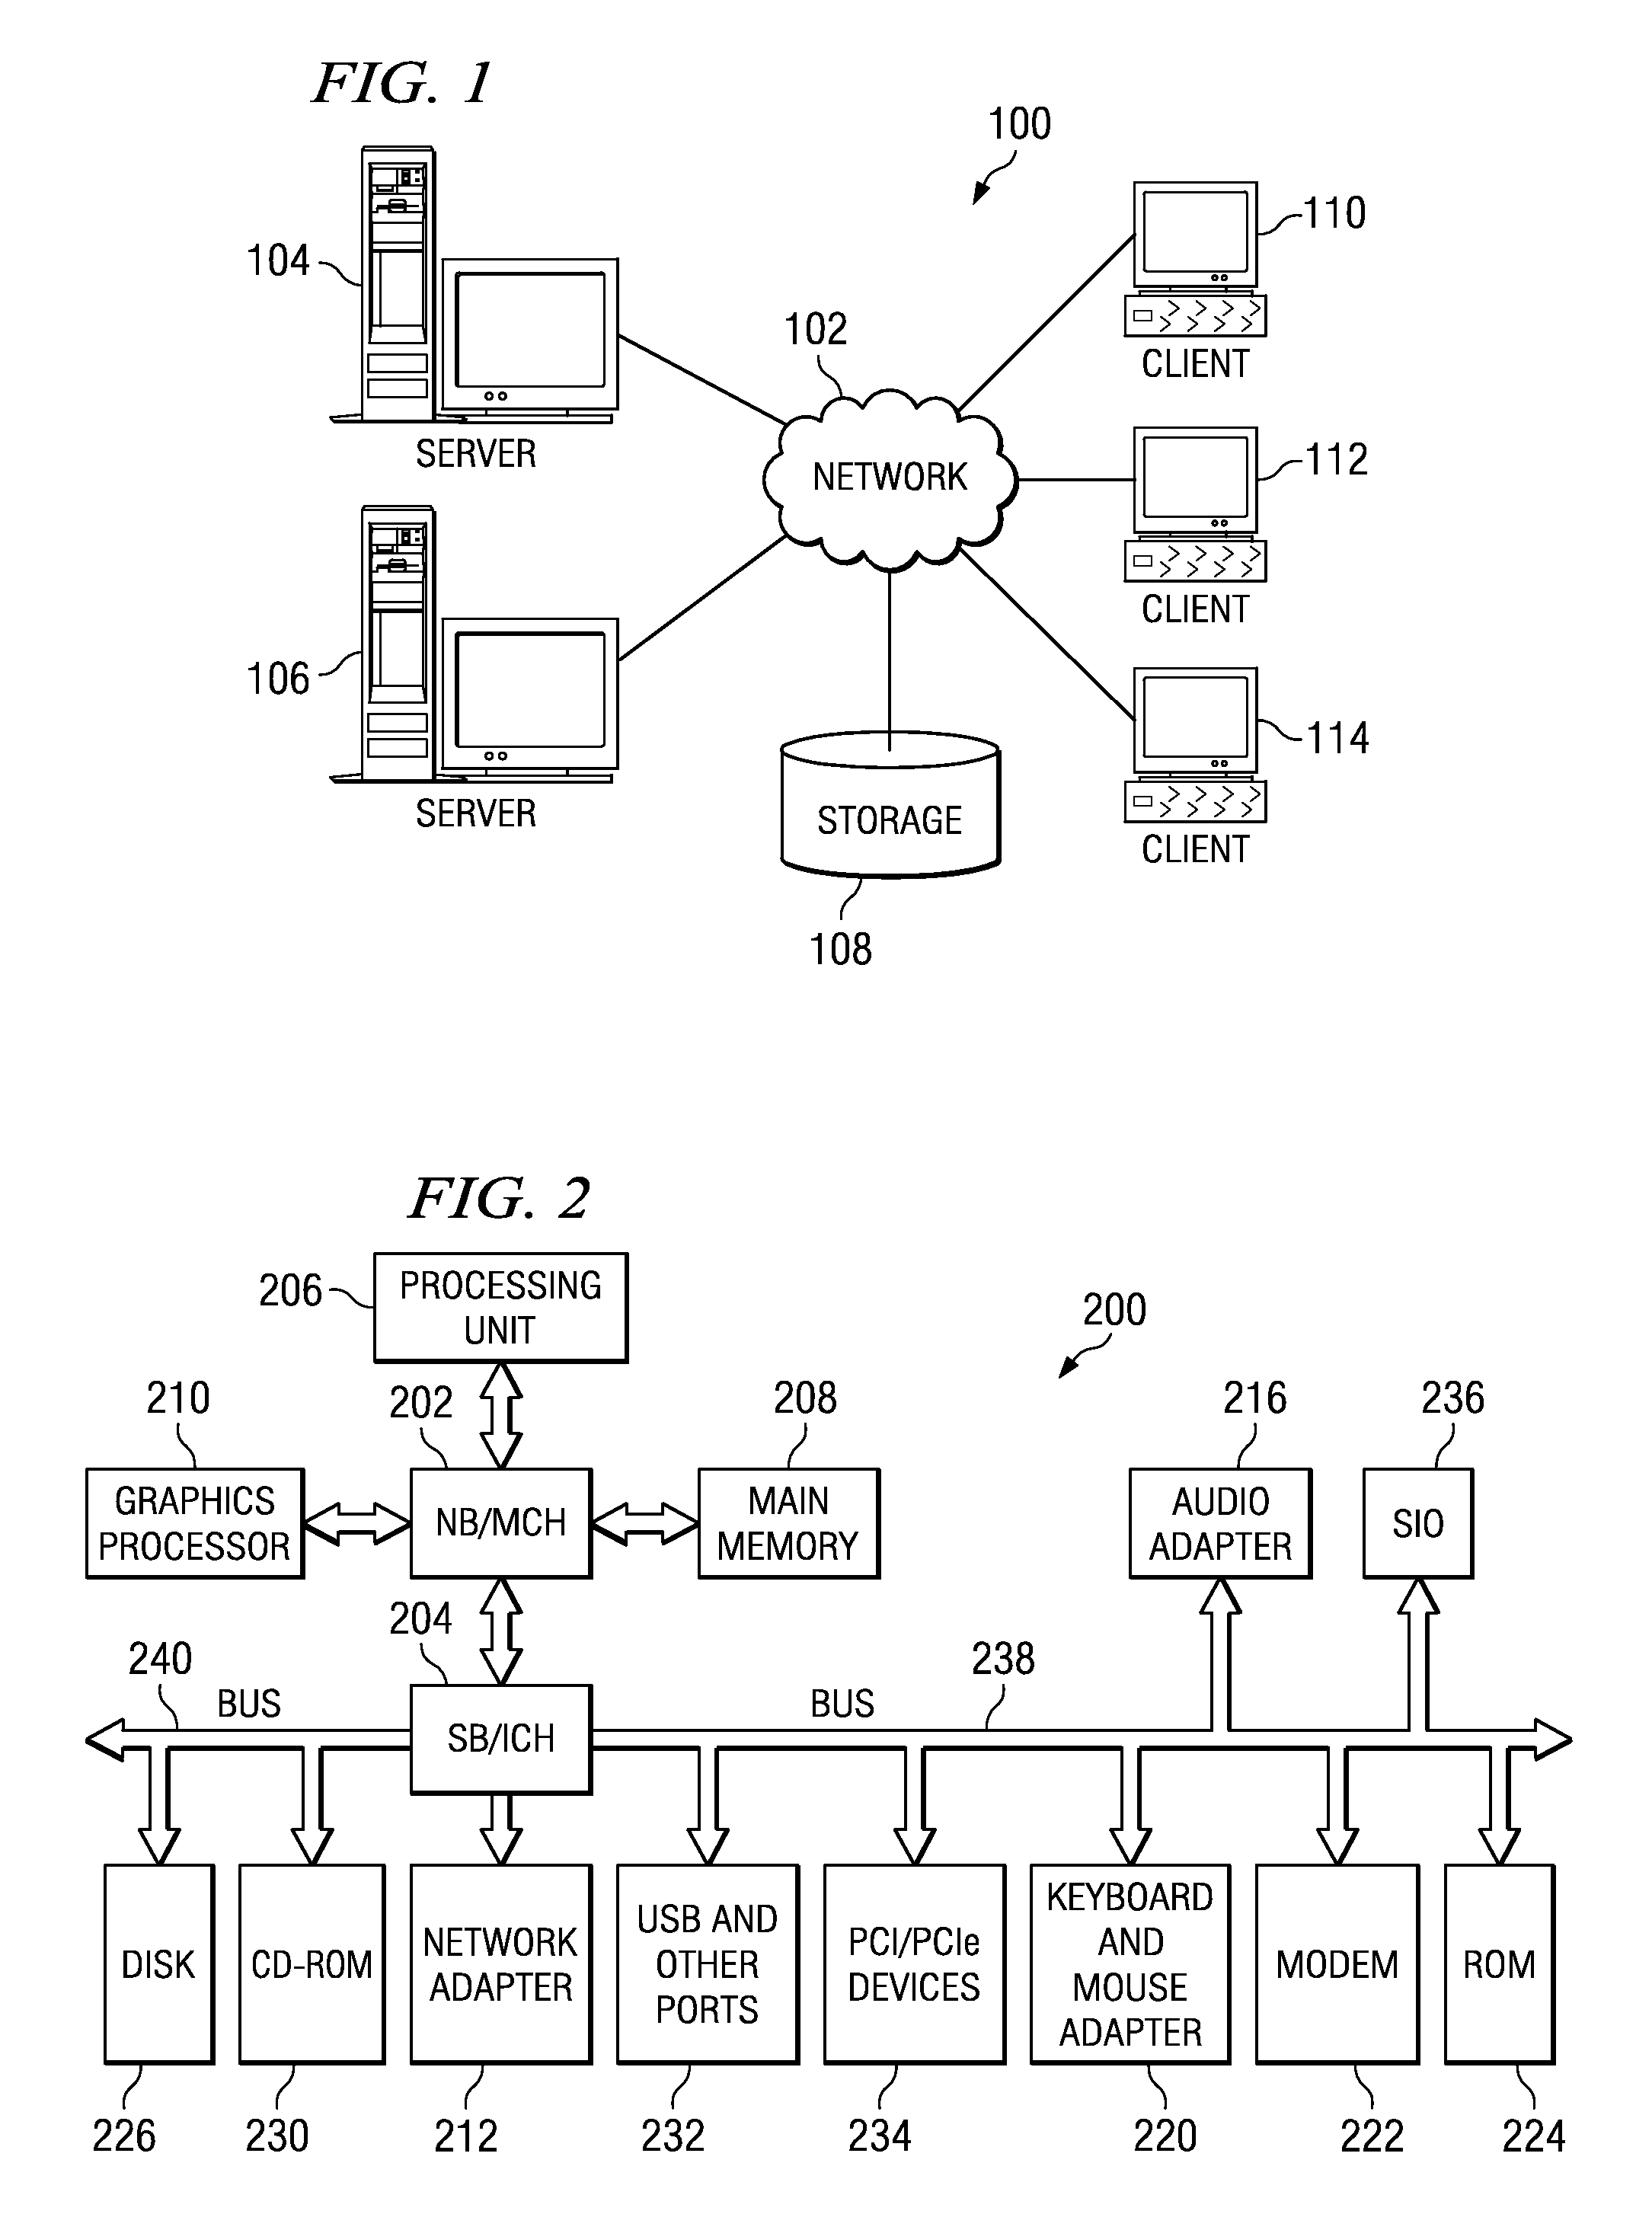 System and method for detection of earthquakes and tsunamis, and hierarchical analysis, threat classification, and interface to warning systems